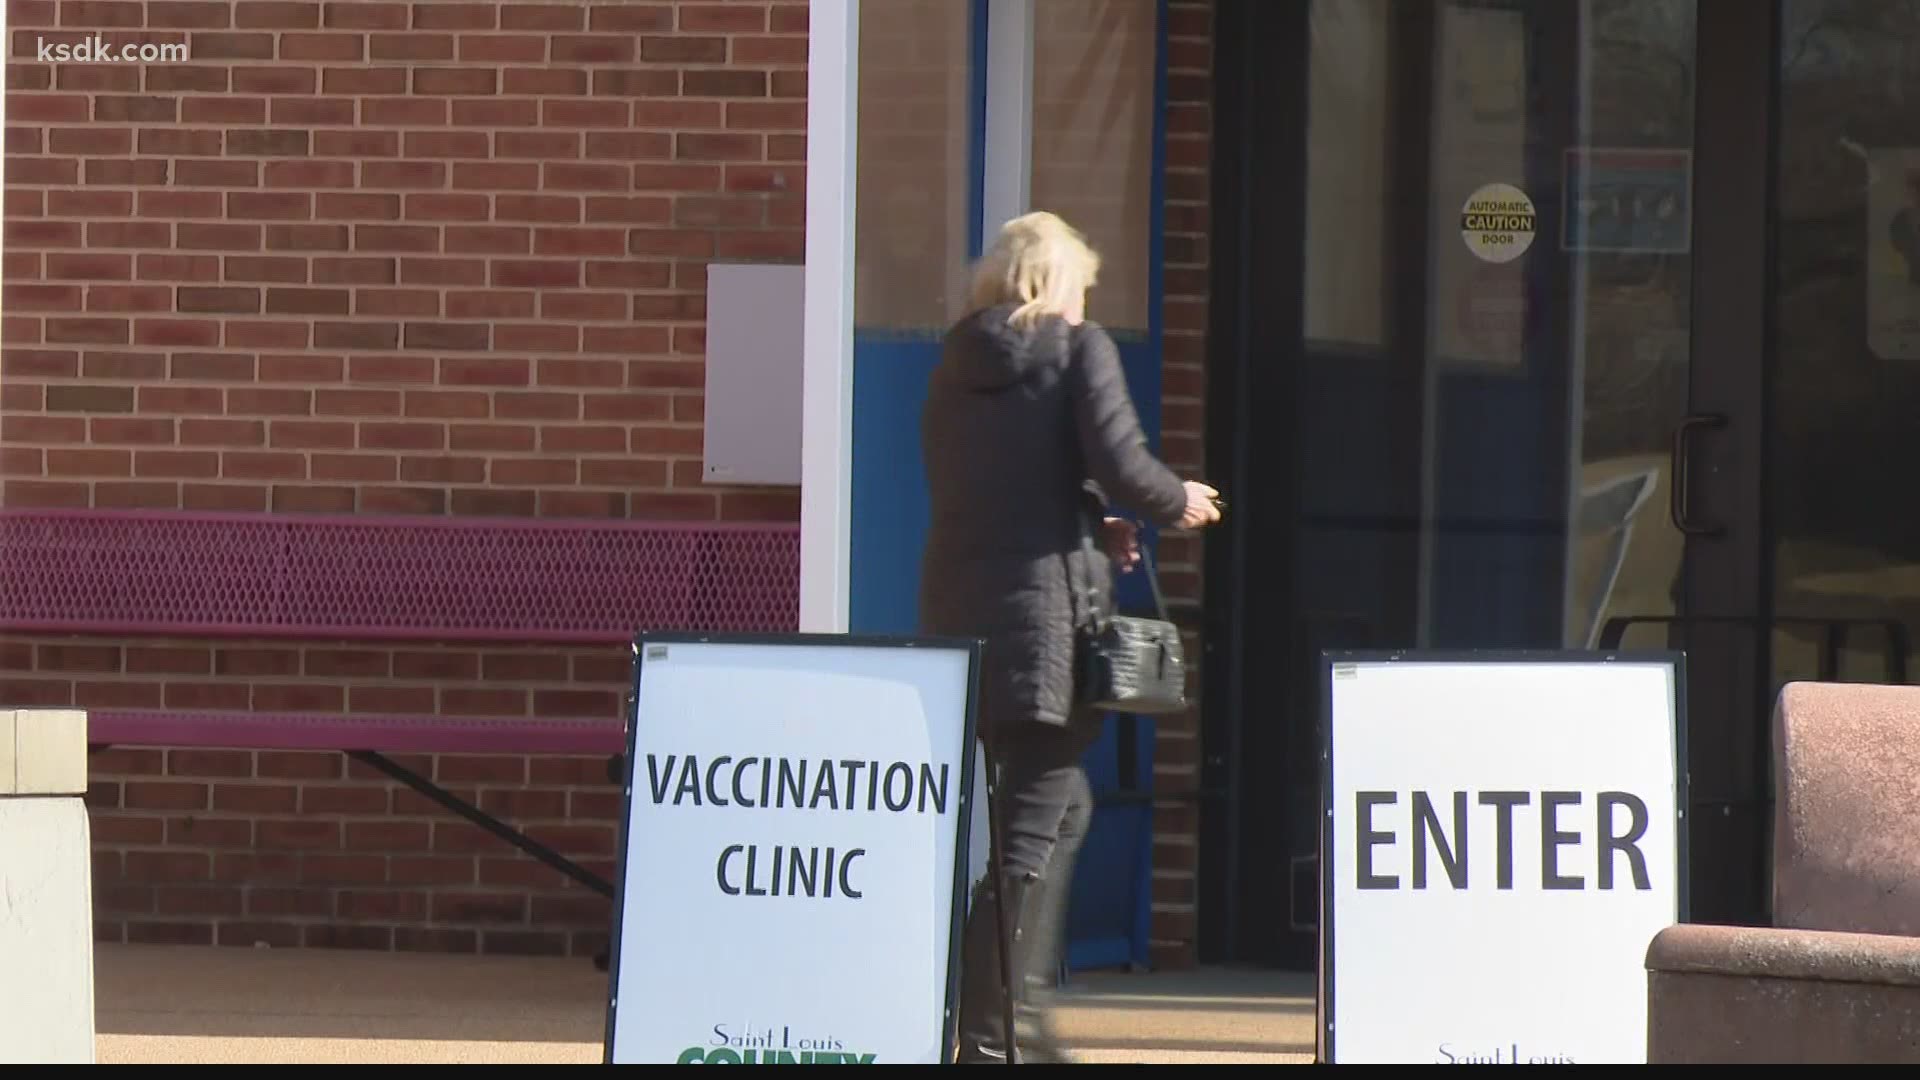 "If you're in Tier 3, you have the right to get the vaccine, but there are a lot of people ahead in line,” explained the St. Louis County Department of Public Health